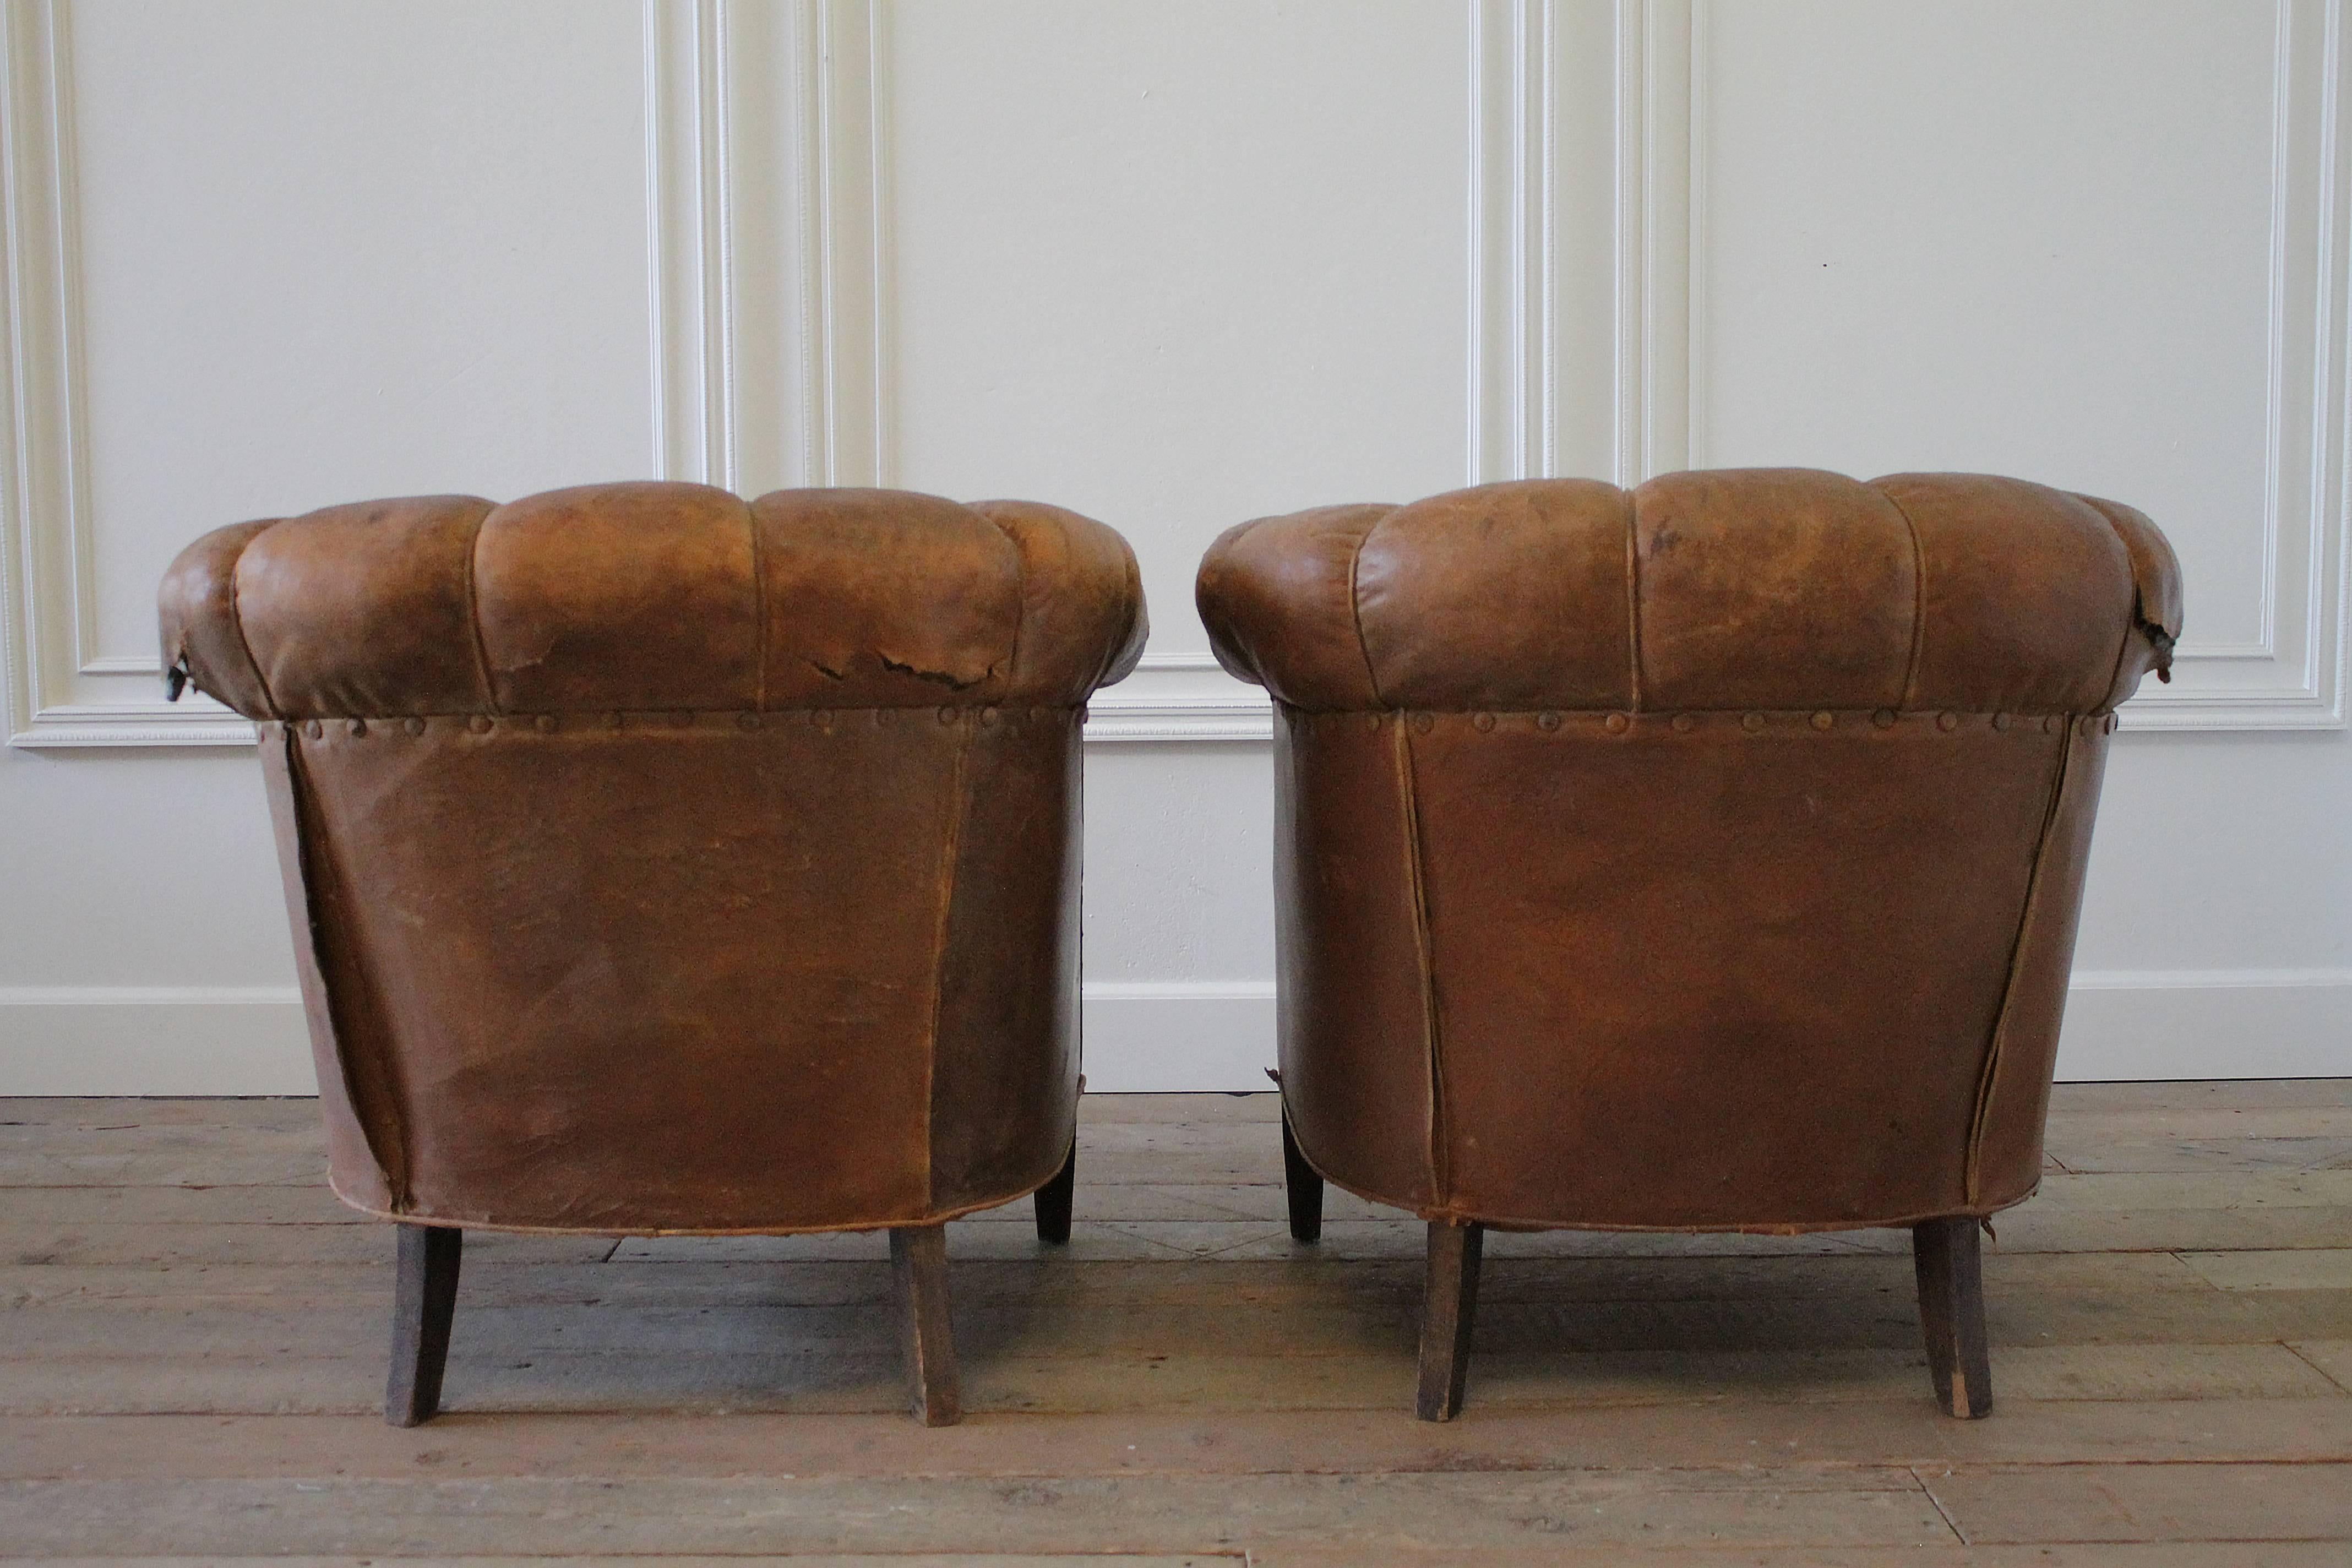 20th Century Pair of French Leather Tub Chairs